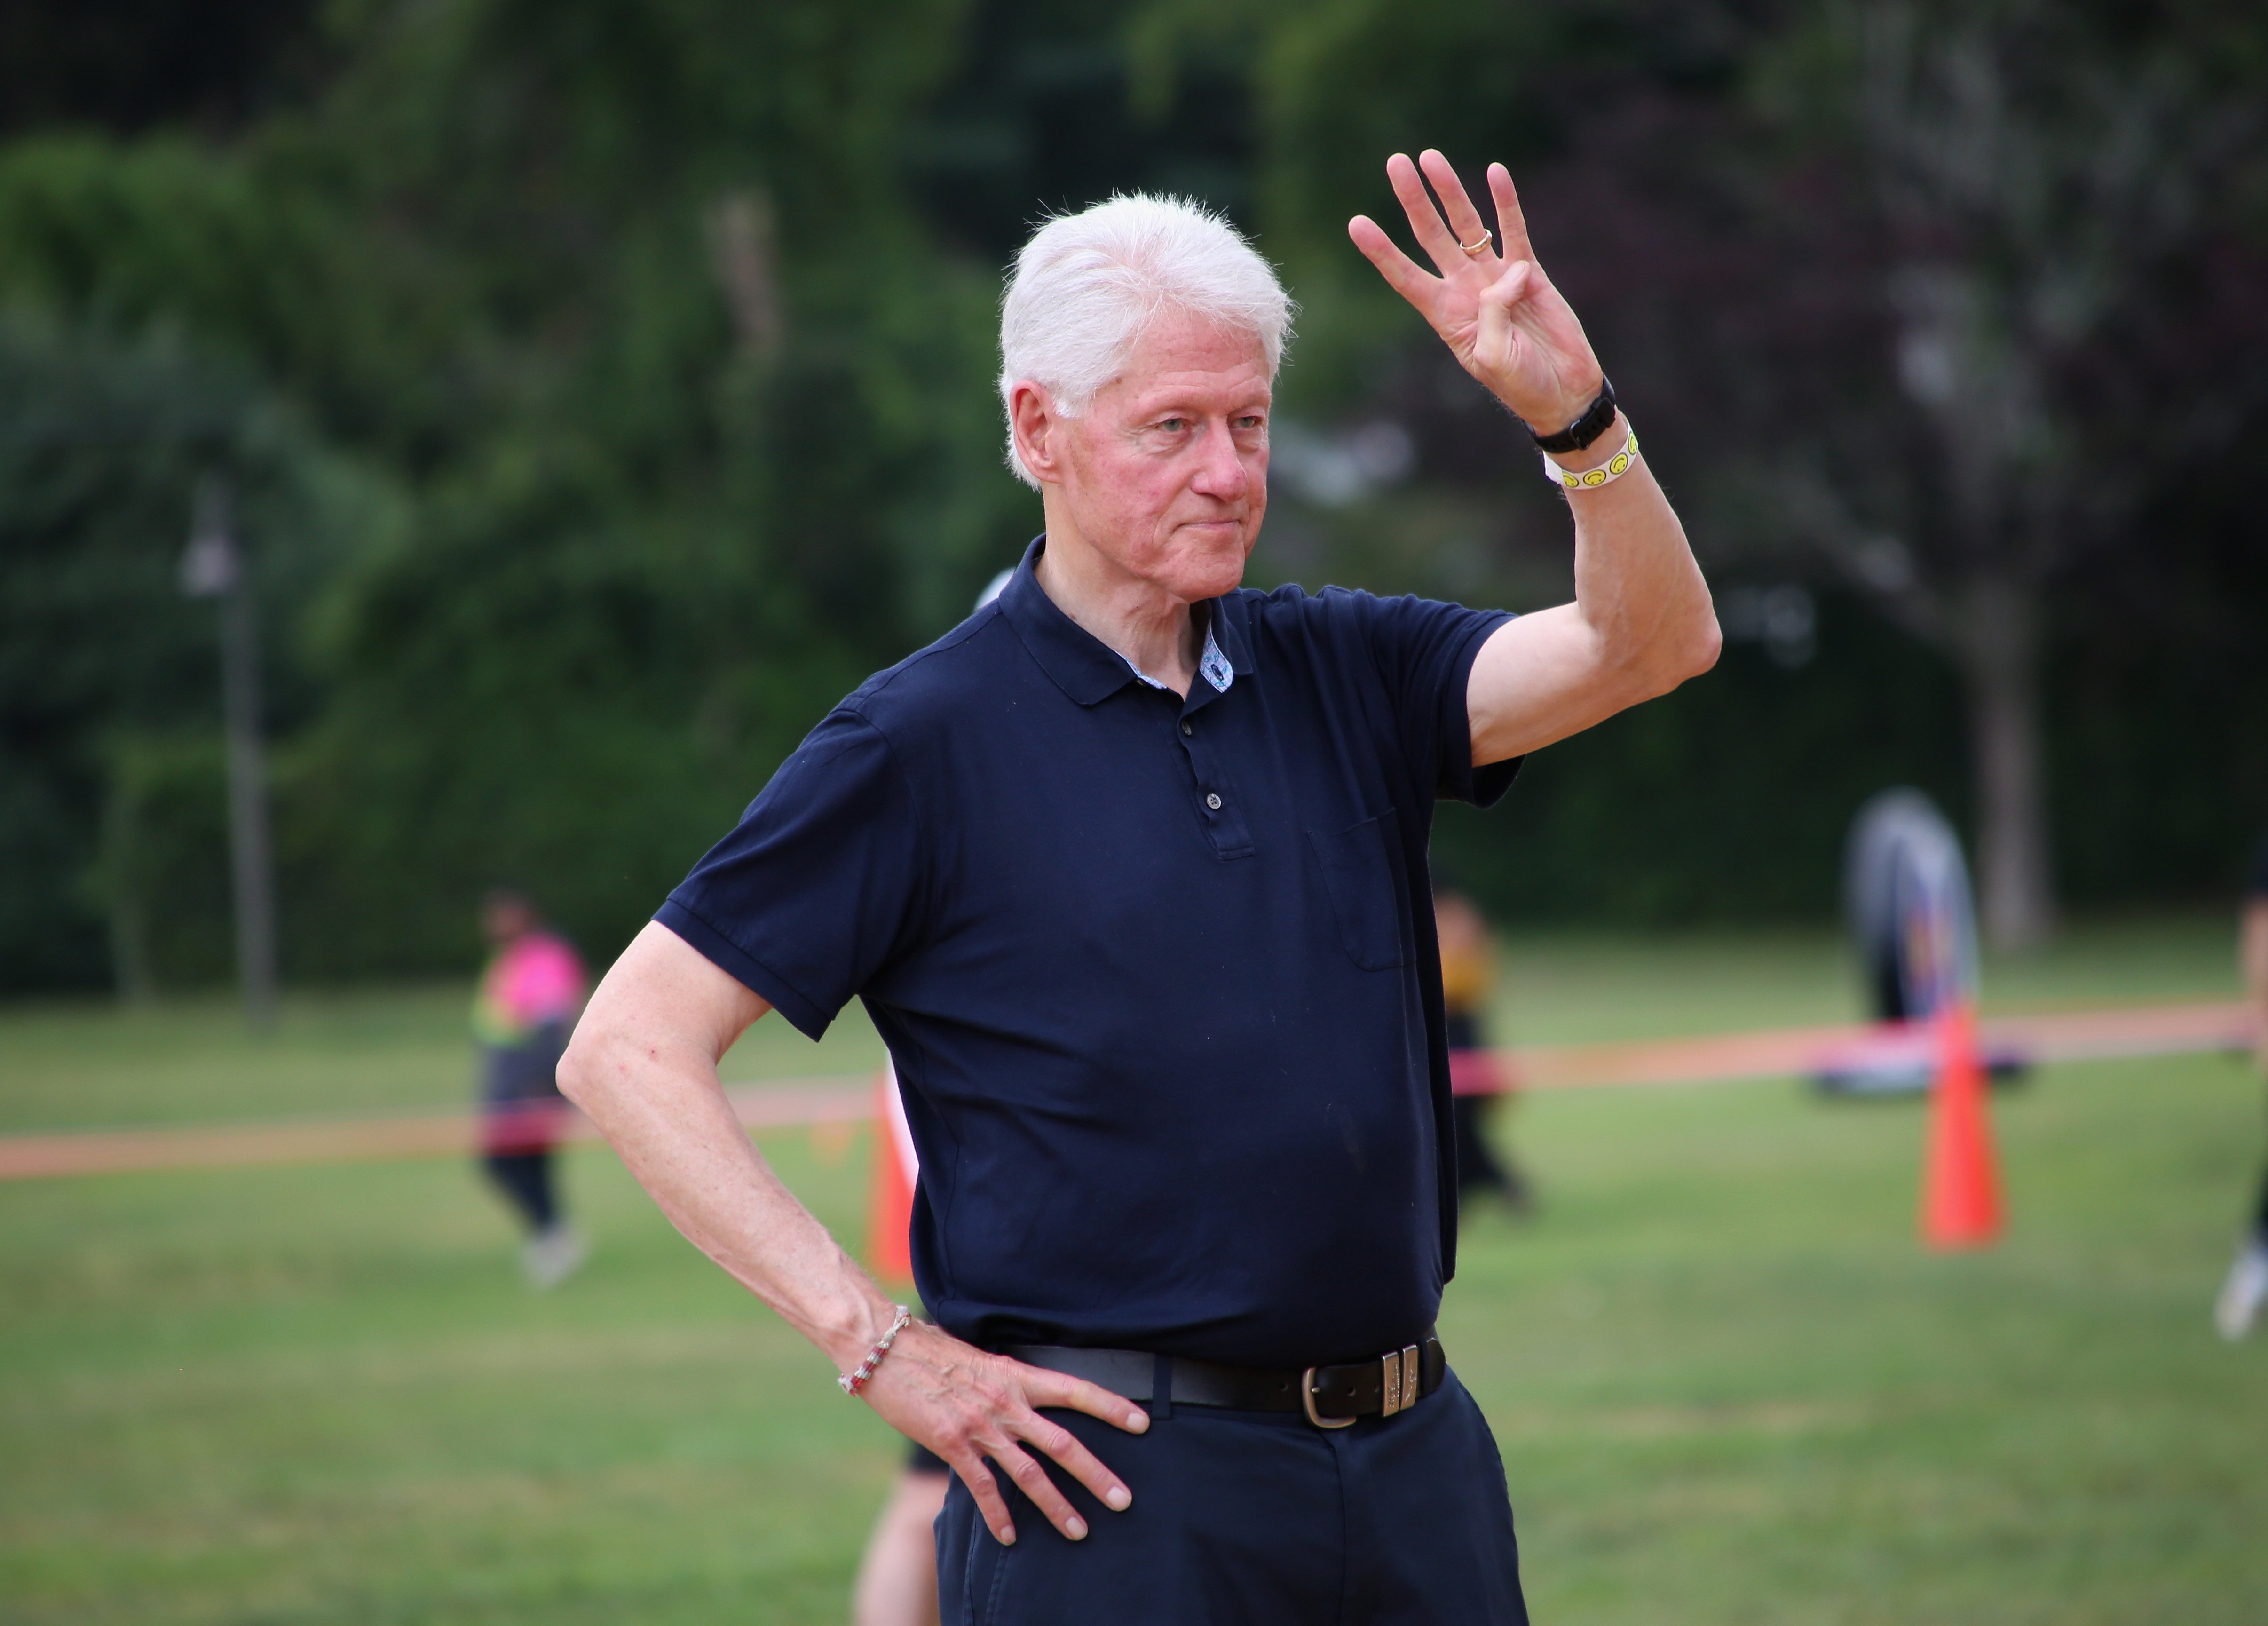 Bill Clinton at the 71st East Hampton Artists and Writers Charity Softball Game at Herrick Park on August 17, 2019 | Photo: Getty Images